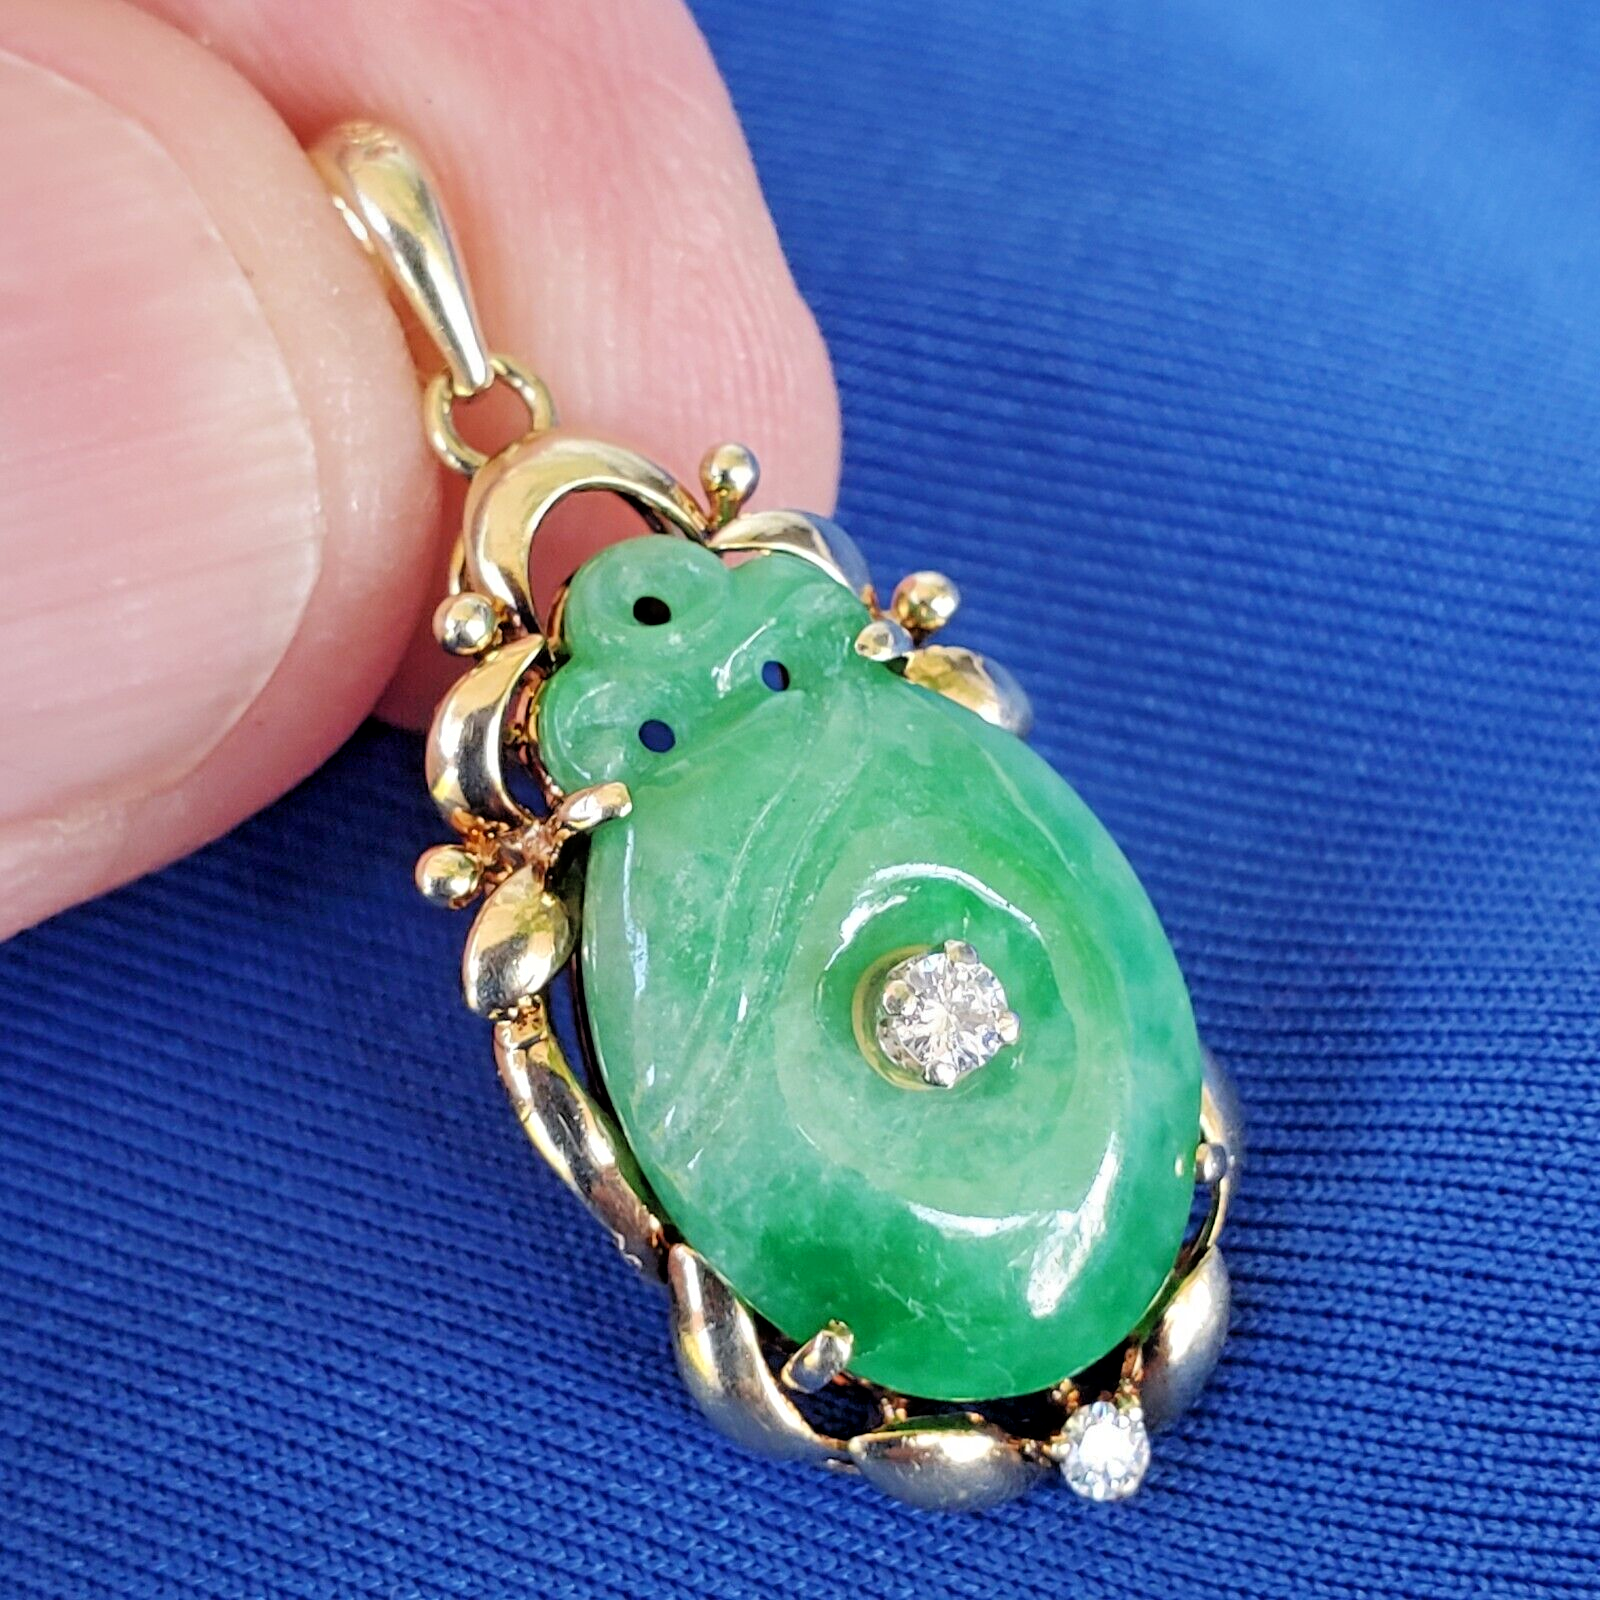 Primary image for Earth mined Jade Diamond Deco Pendant Vivid Green Vintage Charm Solid 14k Gold